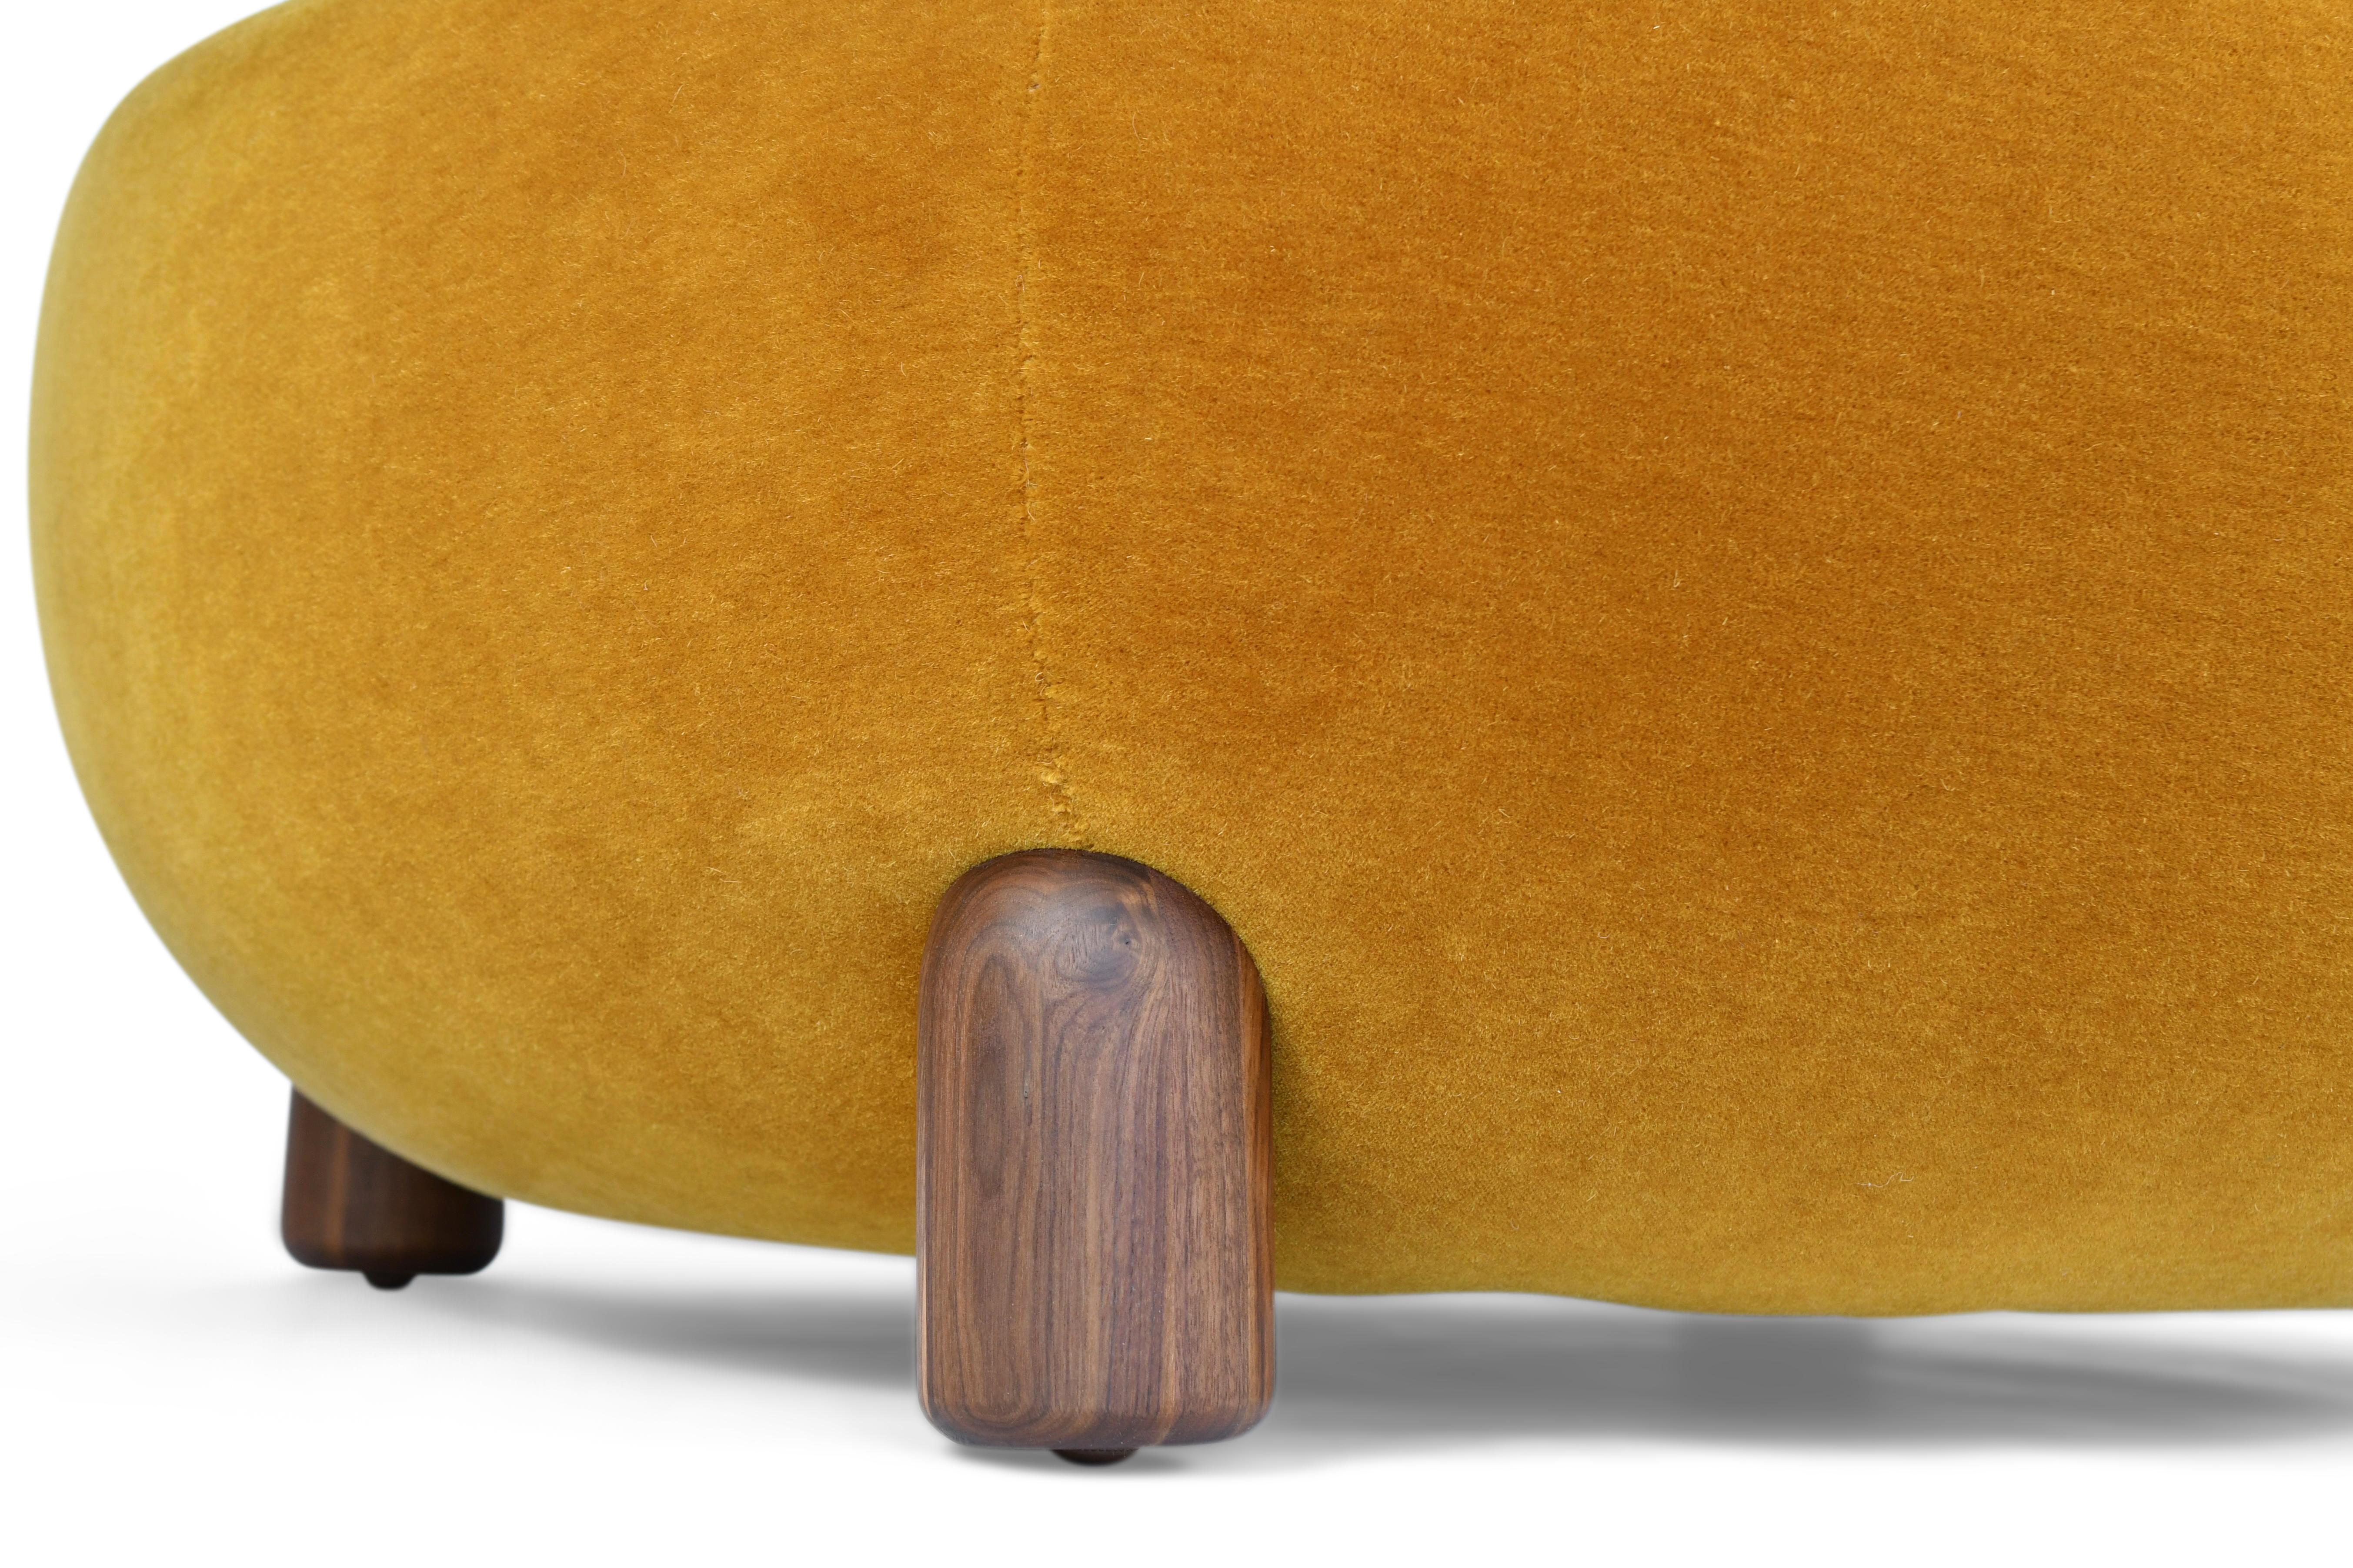 The BeBop Ottoman is a playful way to engage and lighten the mood in any room. The comfortable round ottoman is a combination of contemporary and soft expression, while the solid wood legs stage the personality for interpretation. 

Available in